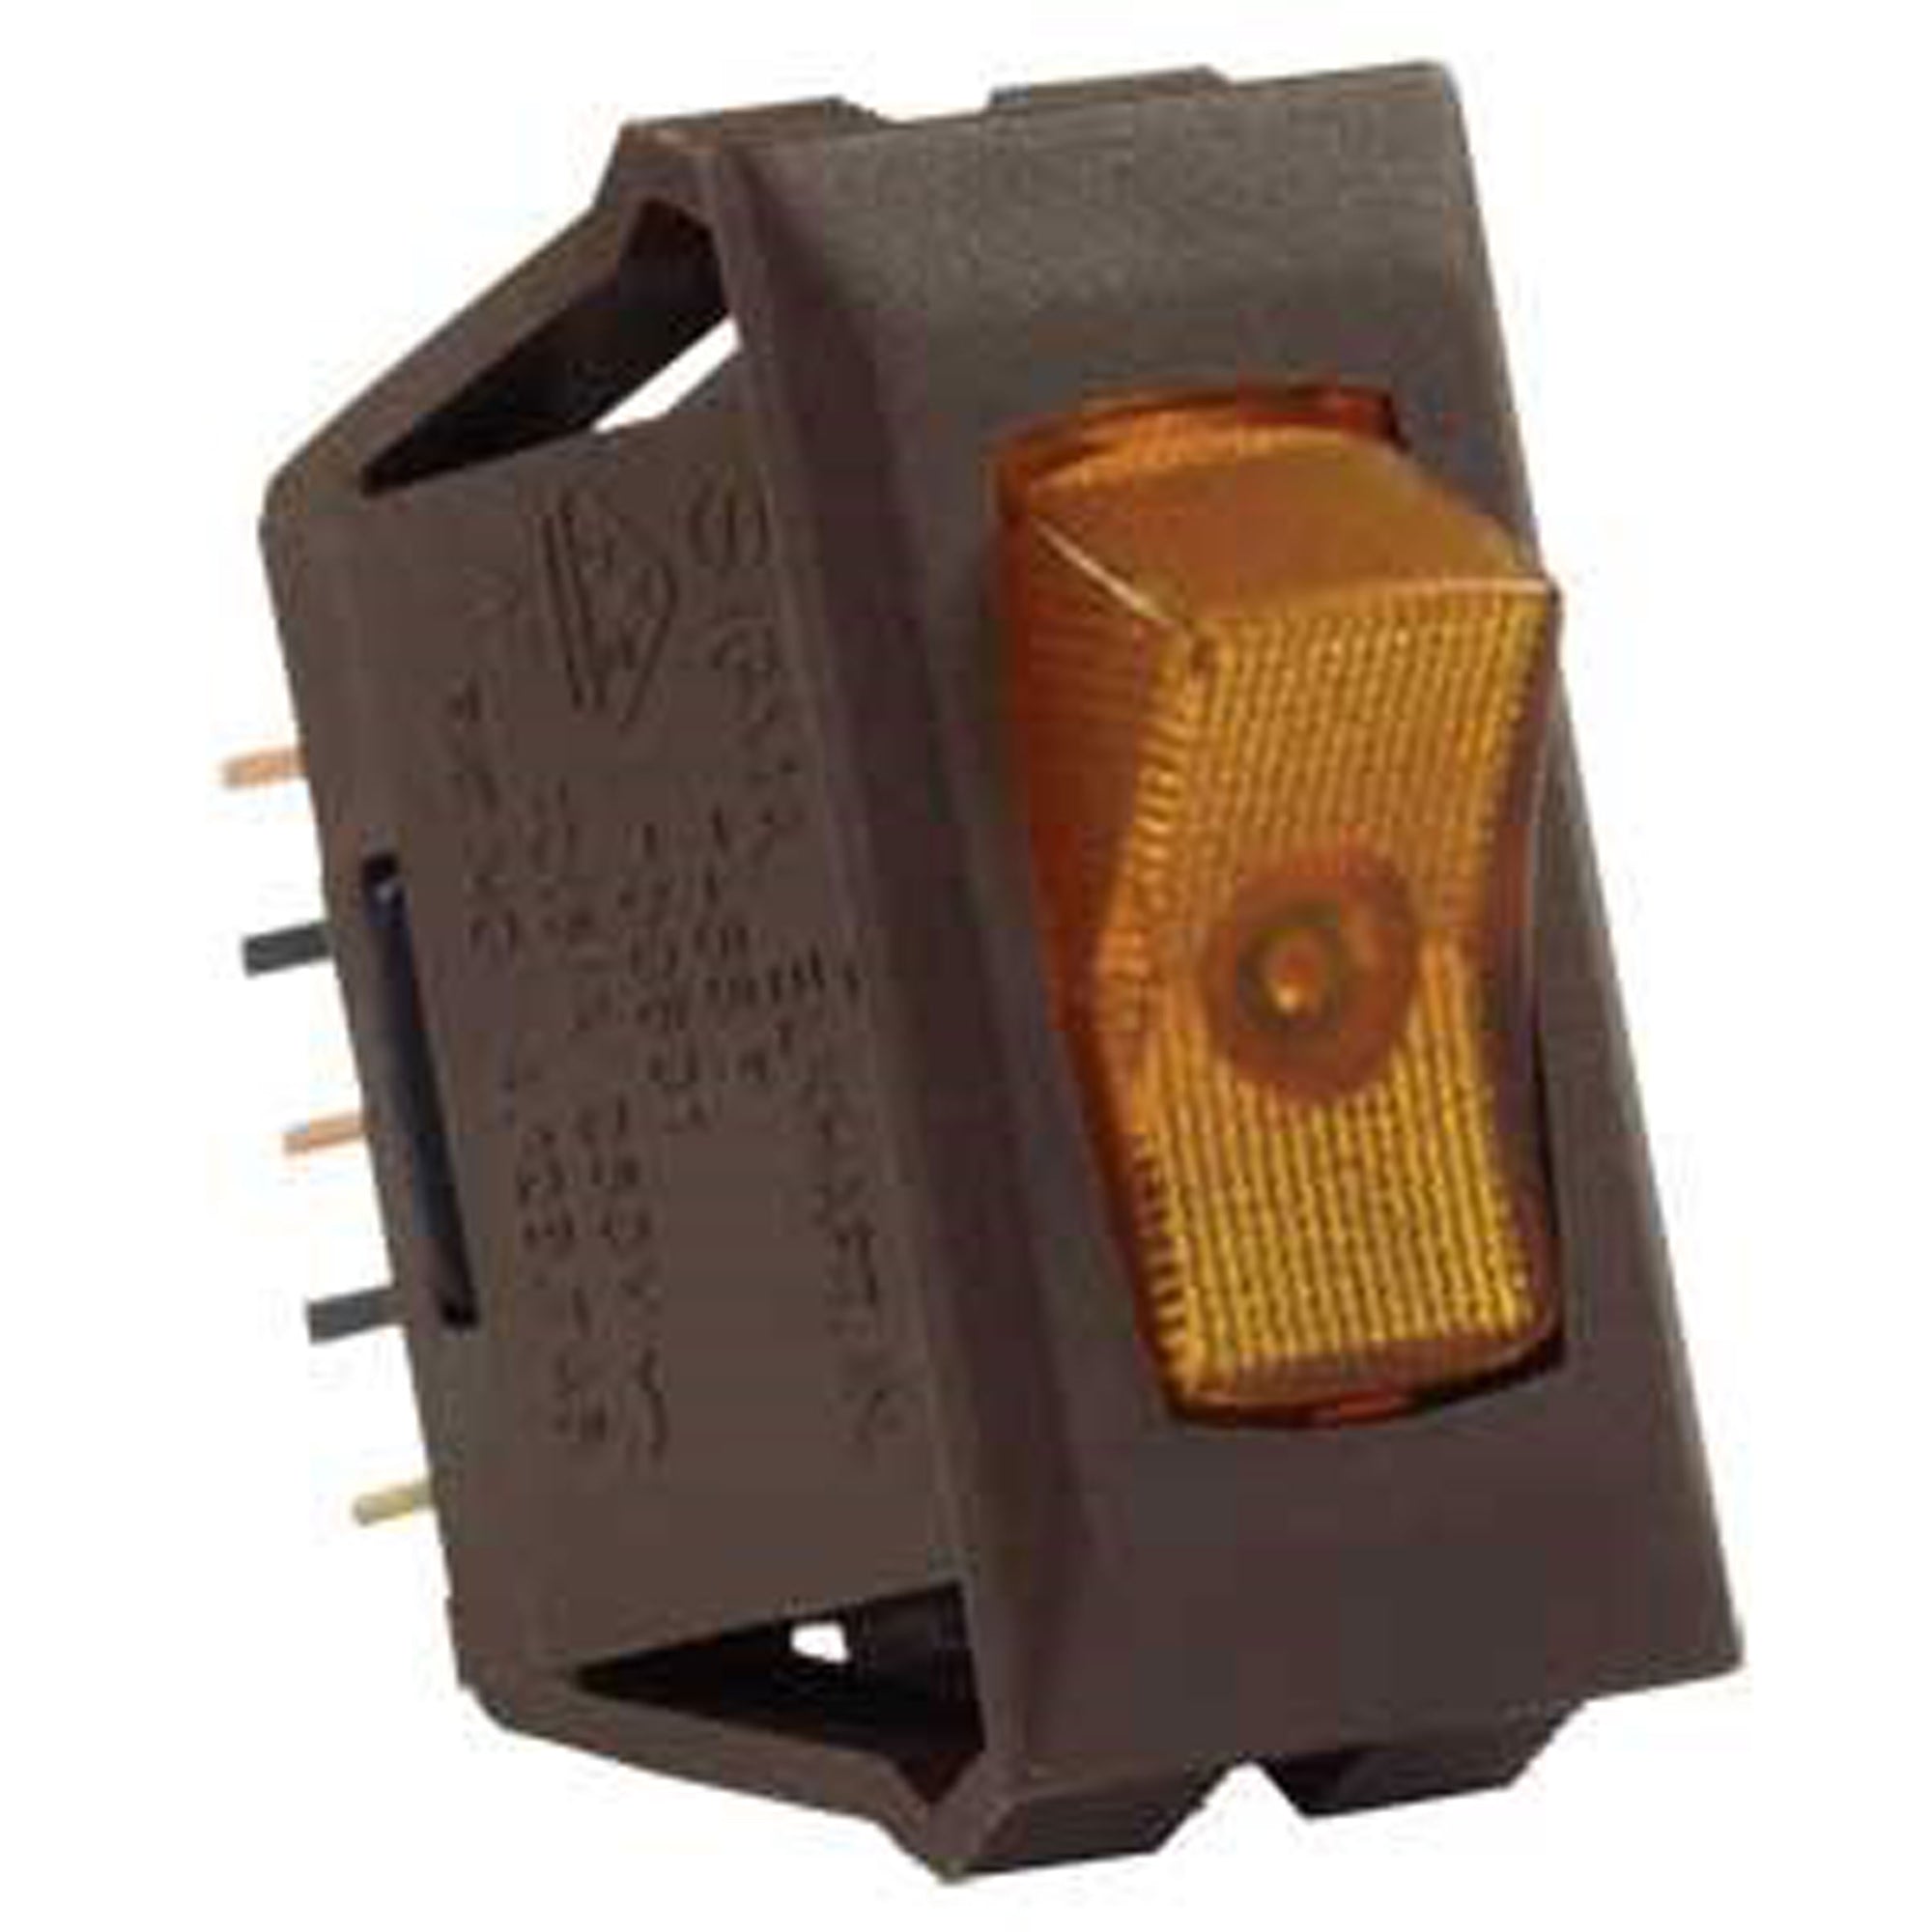 JR Products 12545 Illuminated 12V On/Off Switch - Amber/Brown